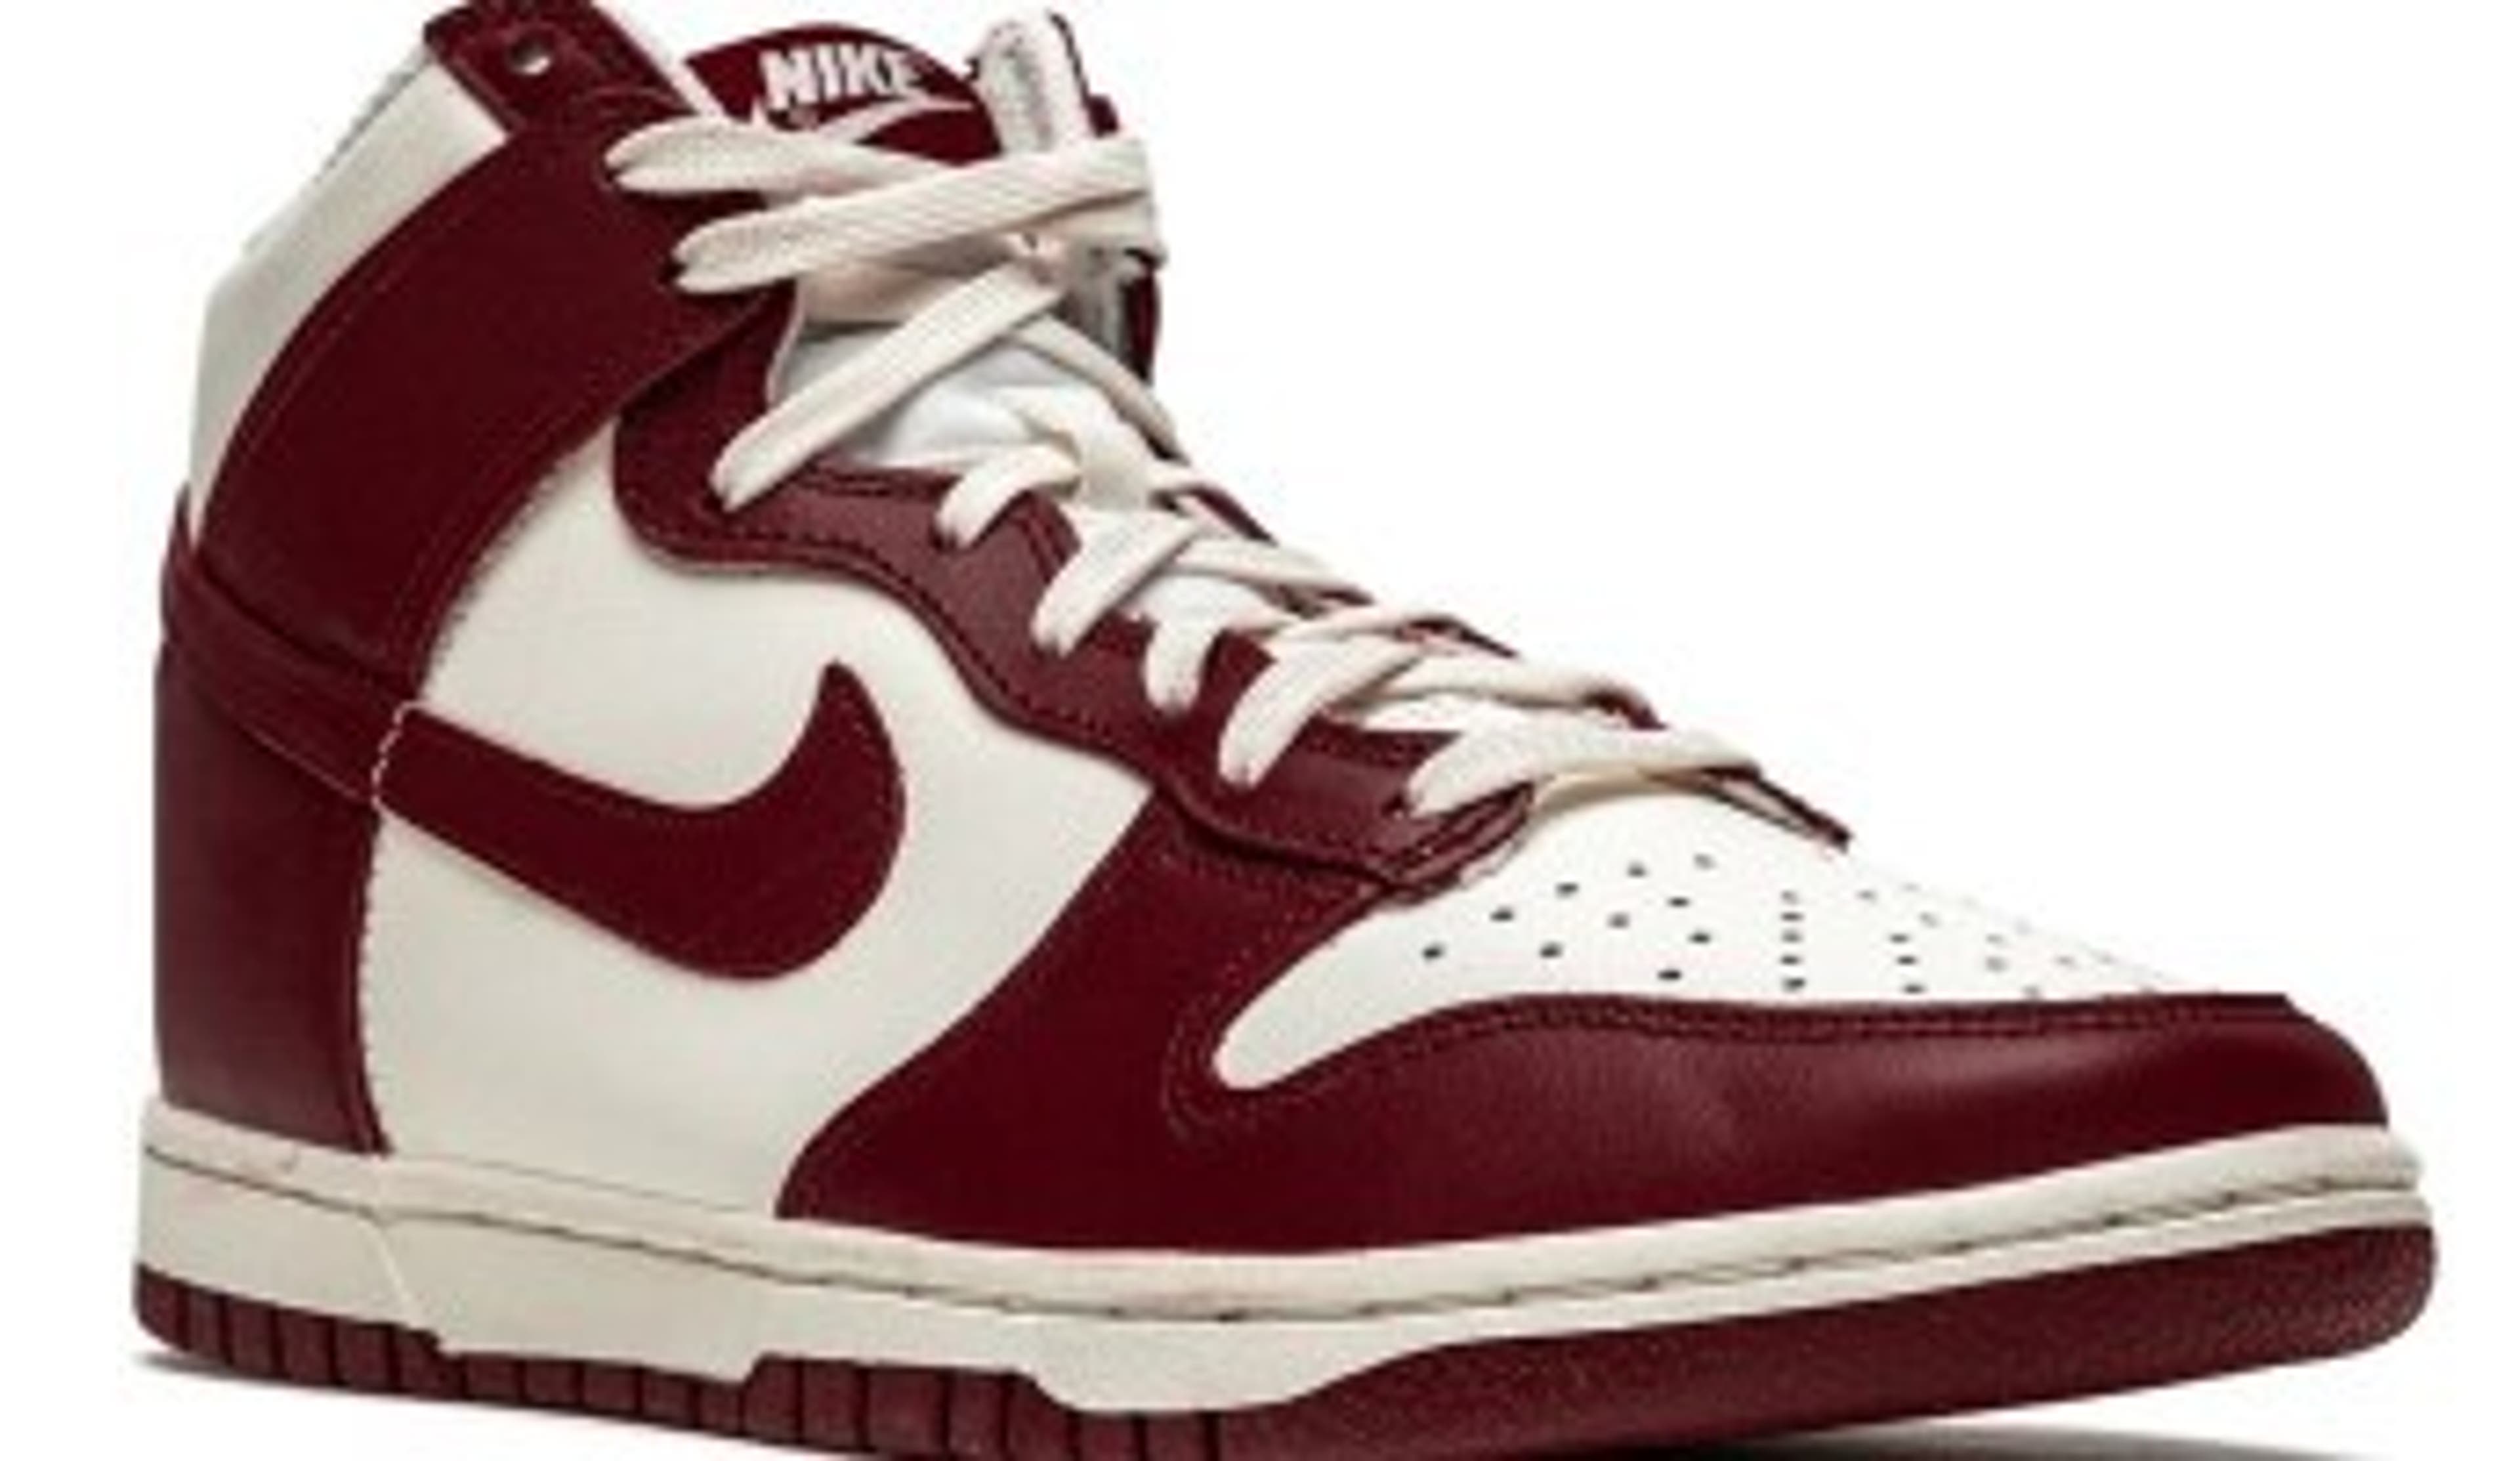  Nike Dunk High sneakers in team red and pale ivory 